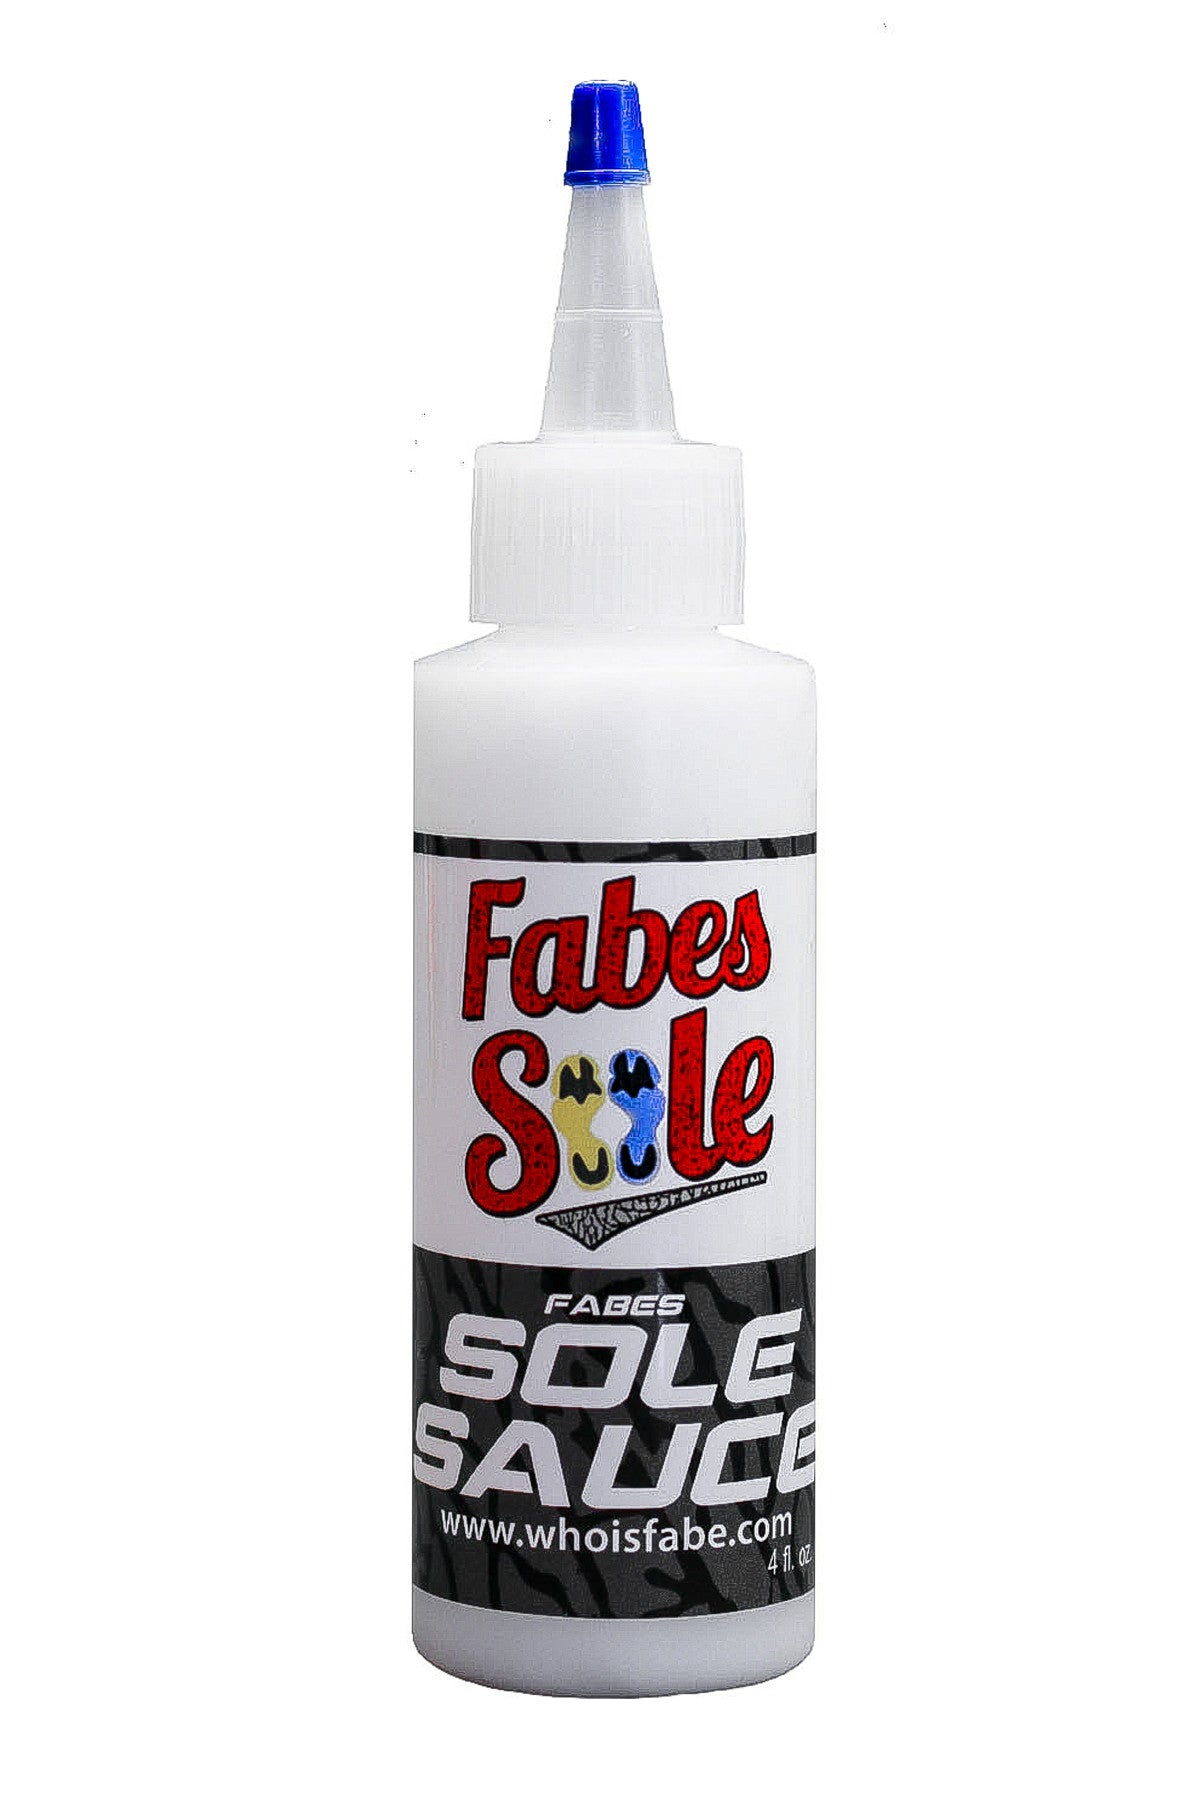 Fabes Sole Sauce